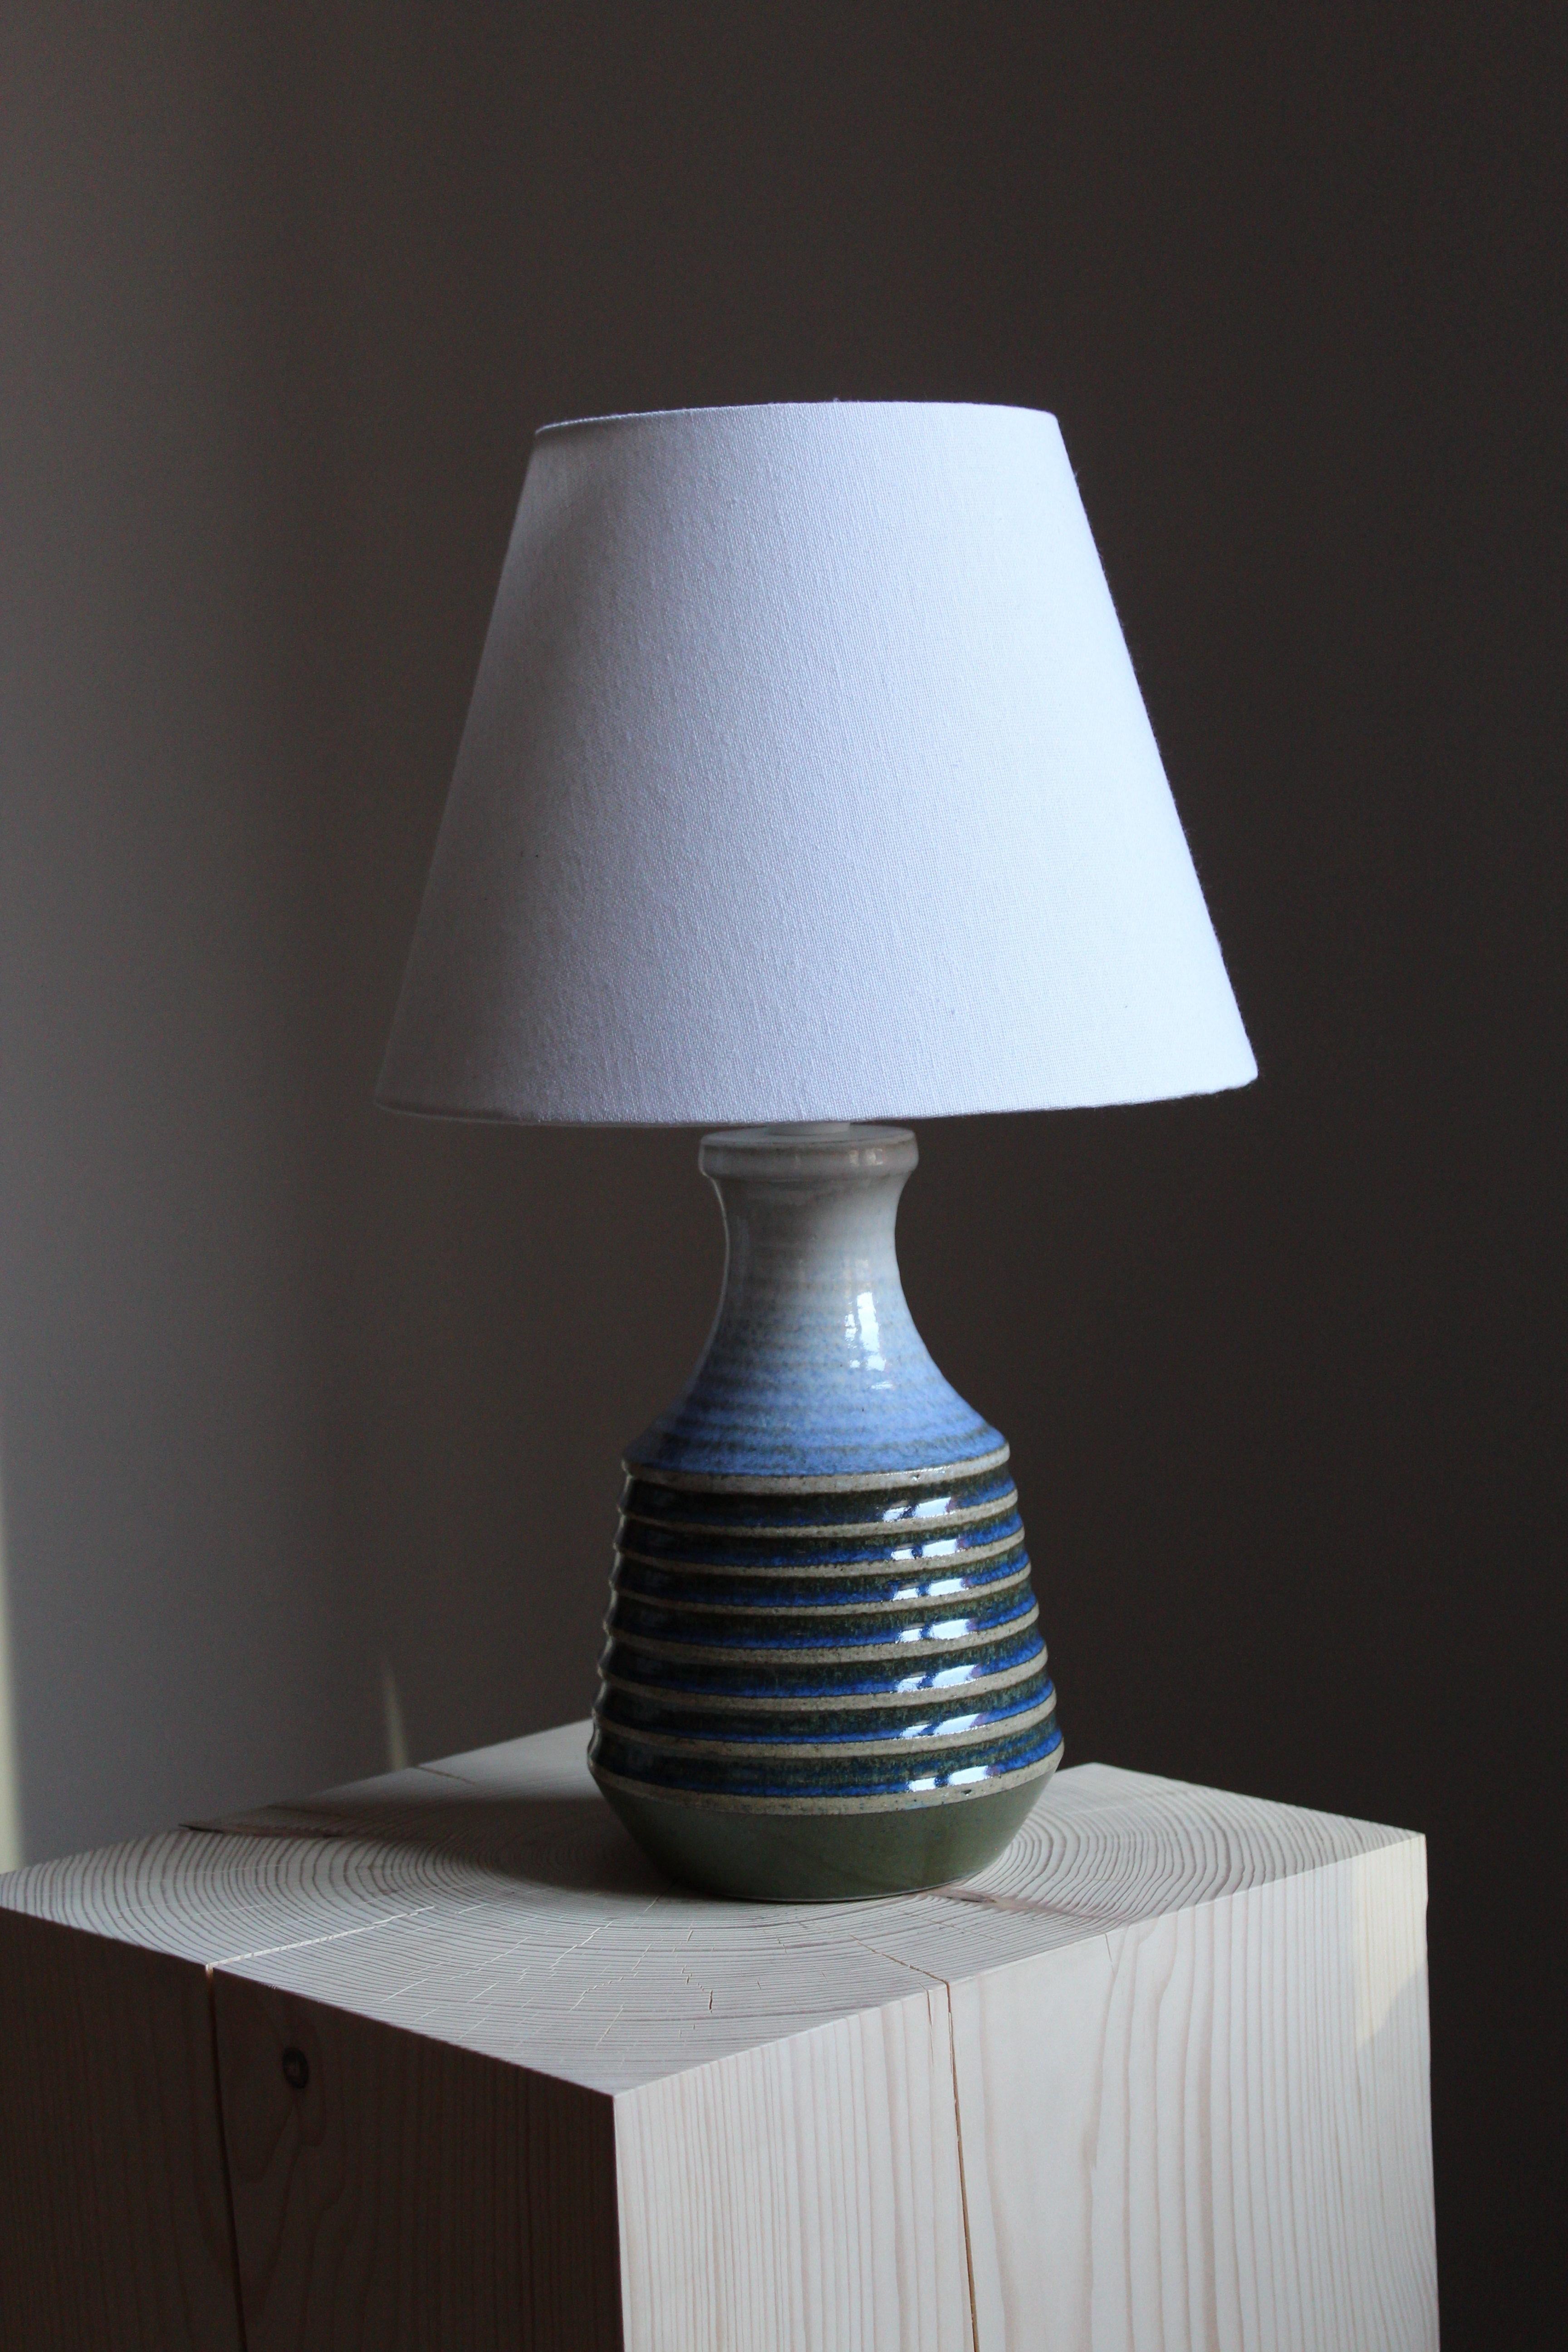 A stoneware table lamp, designed by Heinz Schlichting. Produced by Studio Ego, Sweden, 1960s. Signed

Lampshade in images is not included. Dimensions stated excluding lampshade.

Glaze features blue-grey-black colors.

Other ceramicists of the